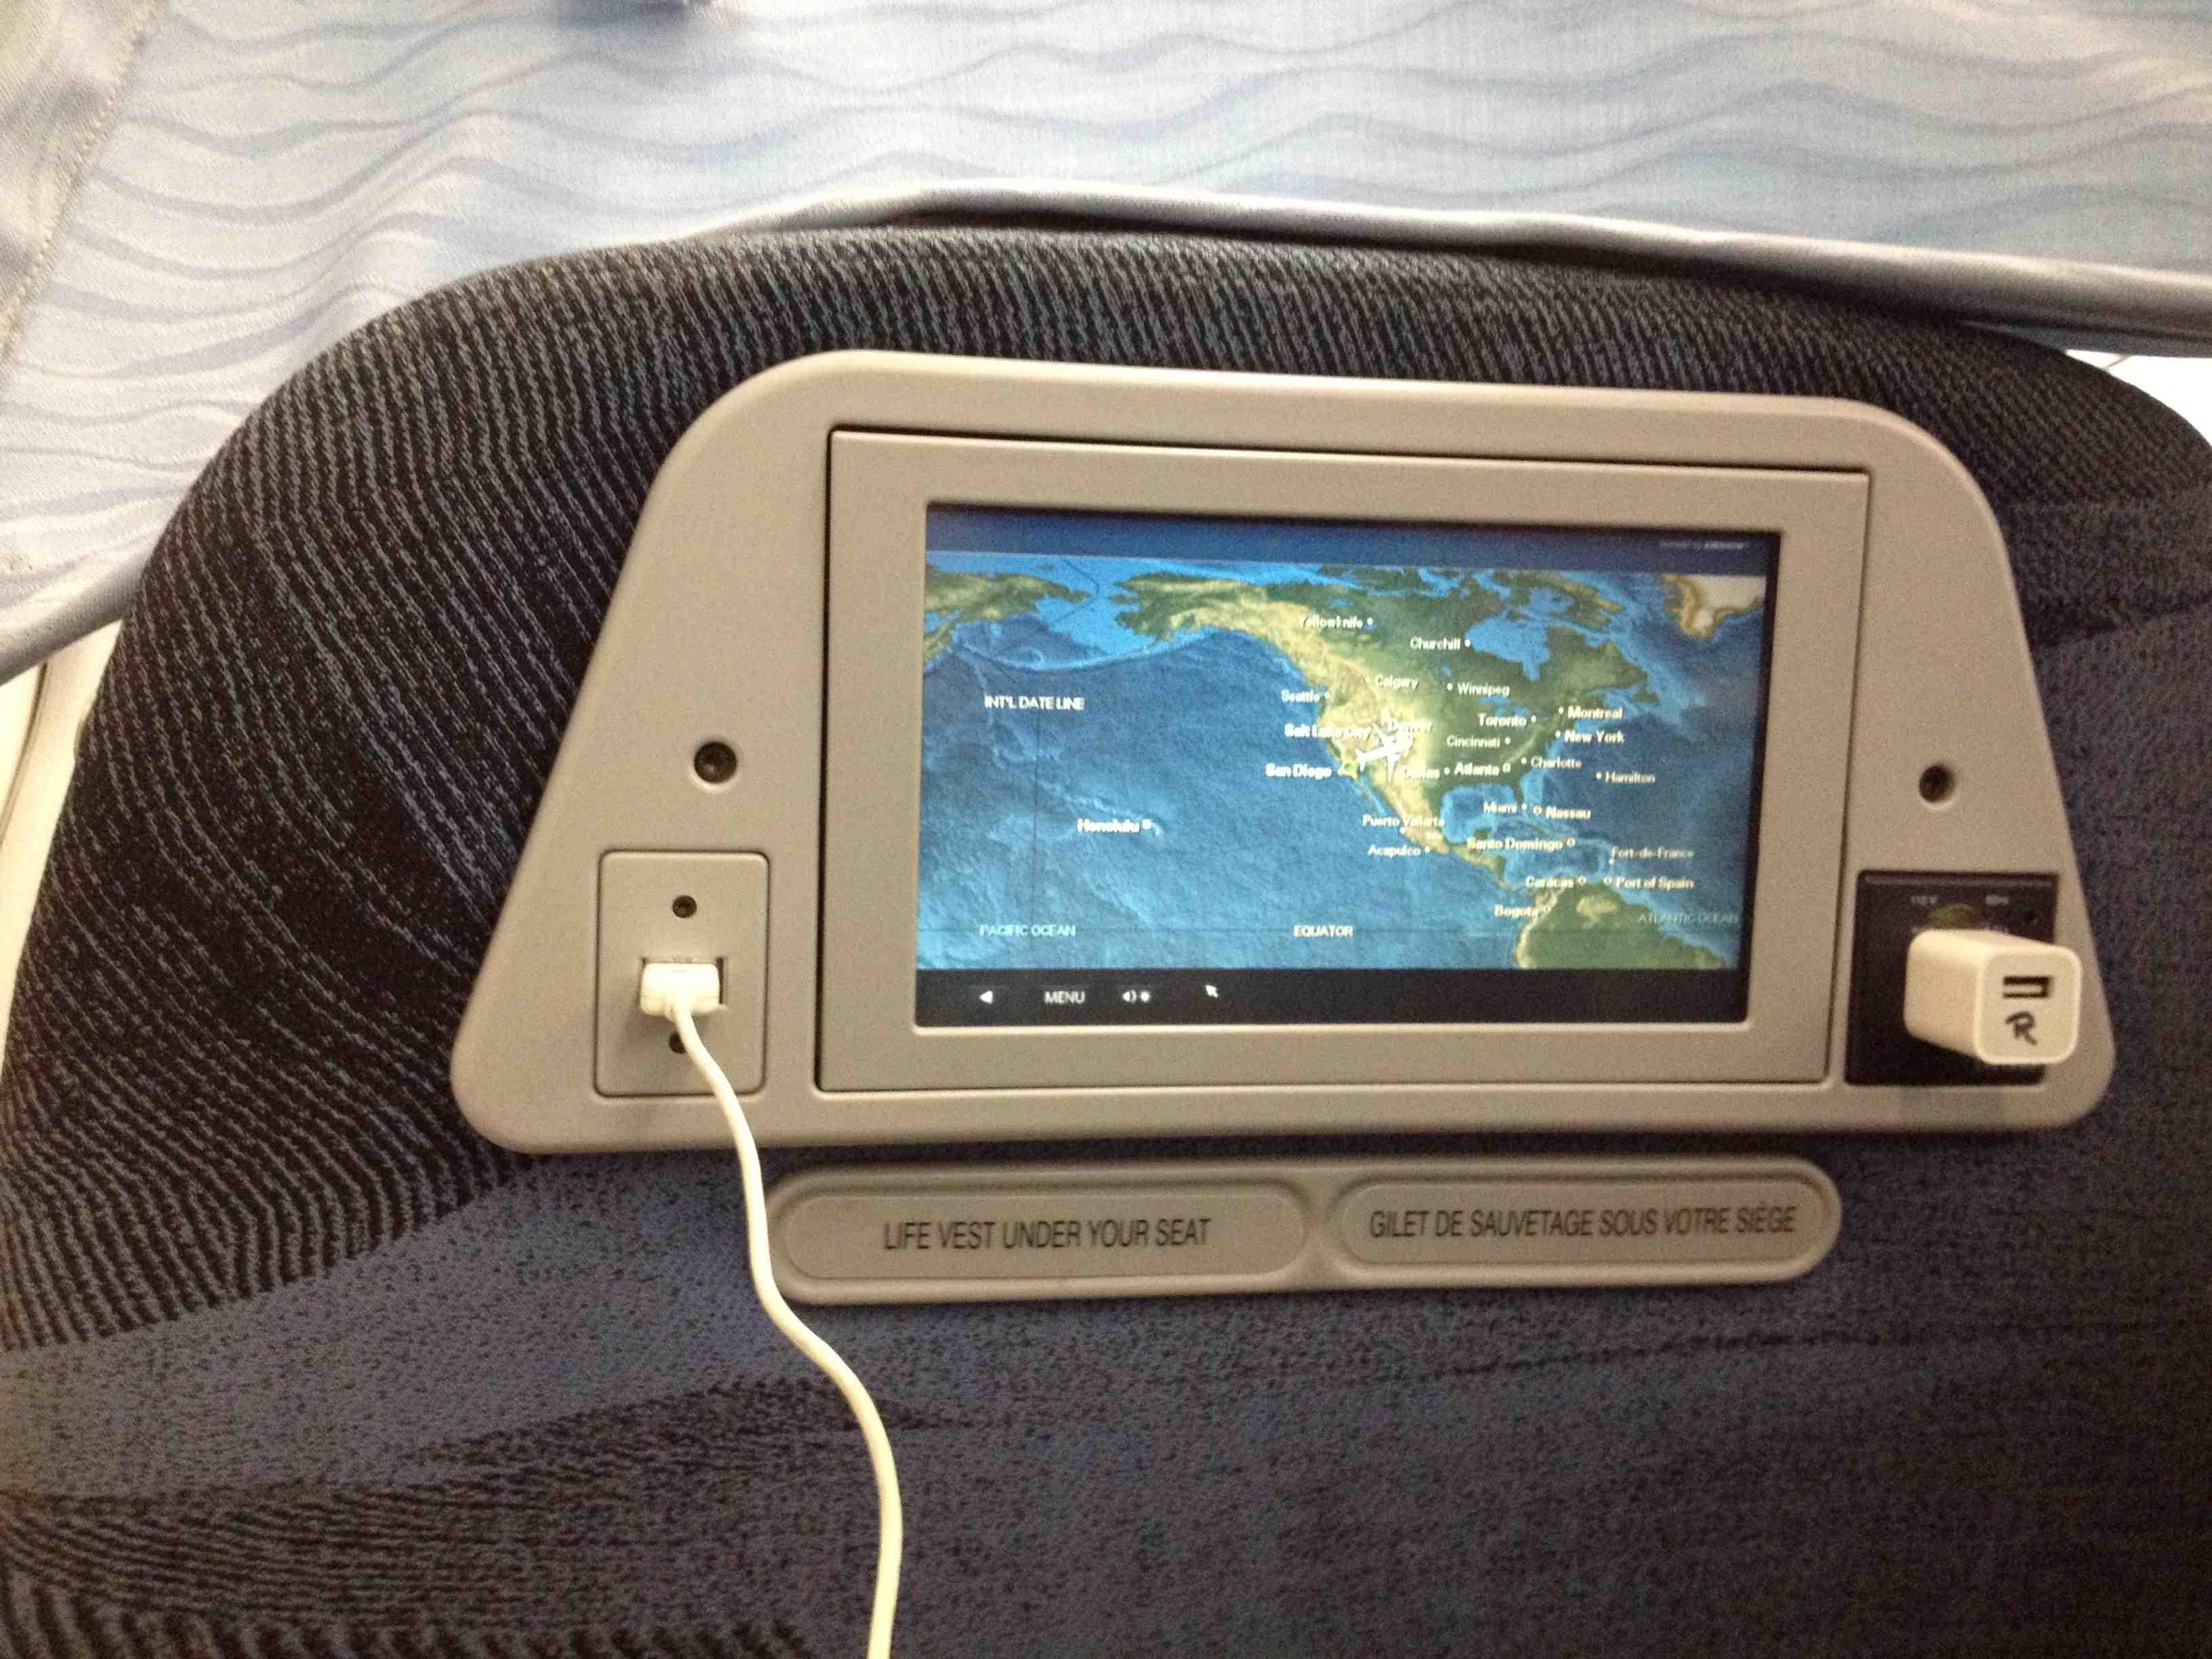 Air Canada Airbus A319 100 Cabin Preferred Seats Inflight Entertainment IFE System and amenities USB and AC Power Port